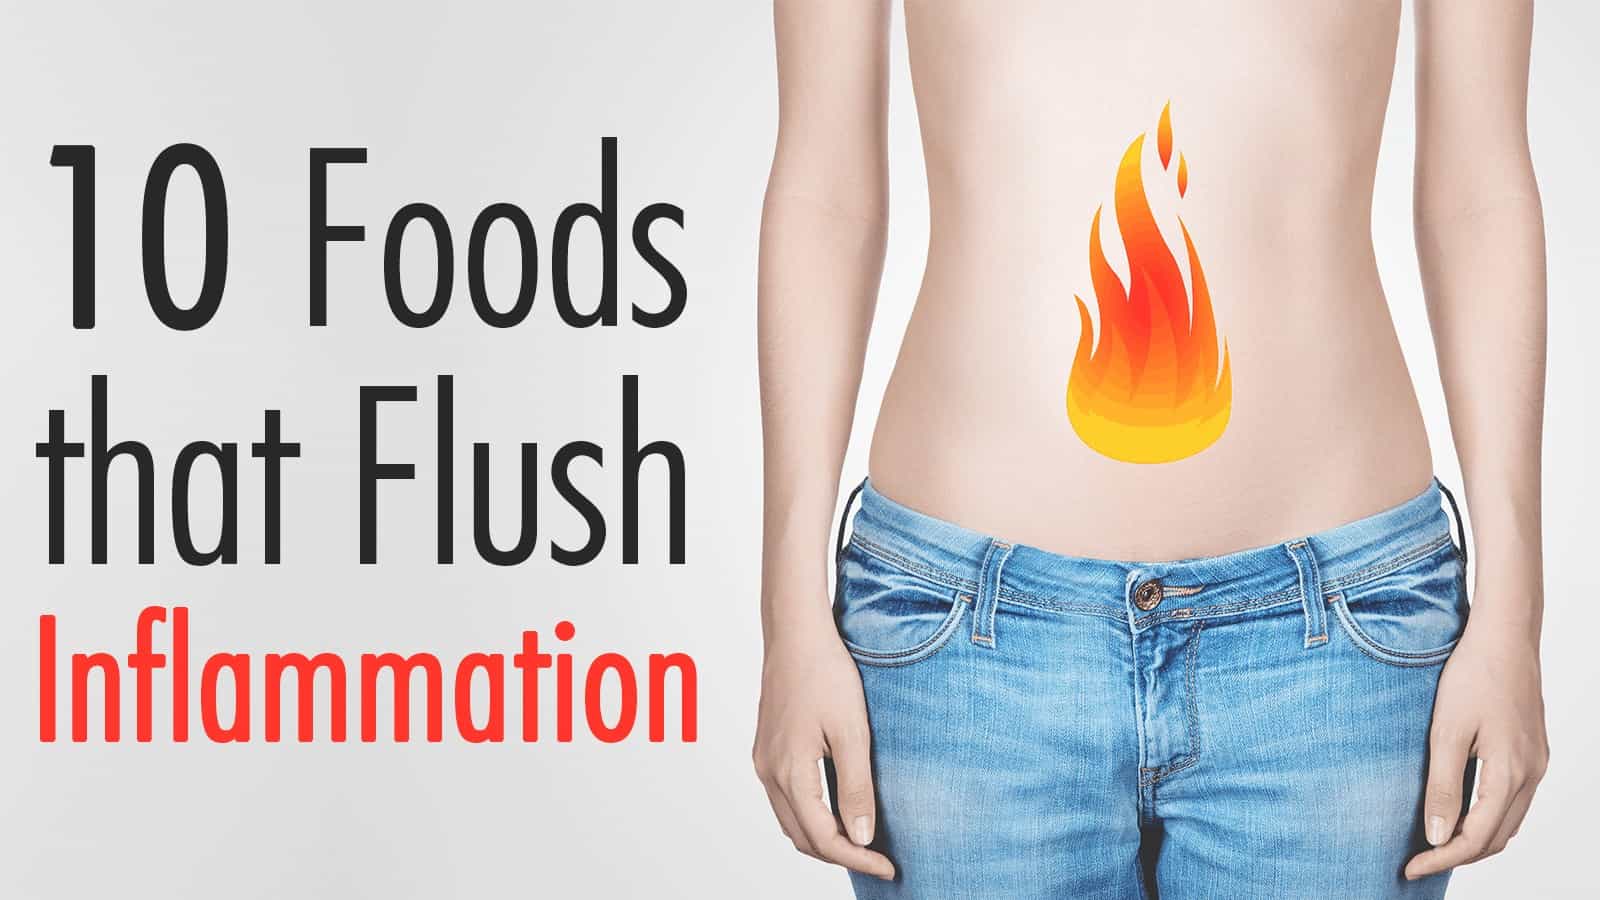 10 Foods that Flush Inflammation